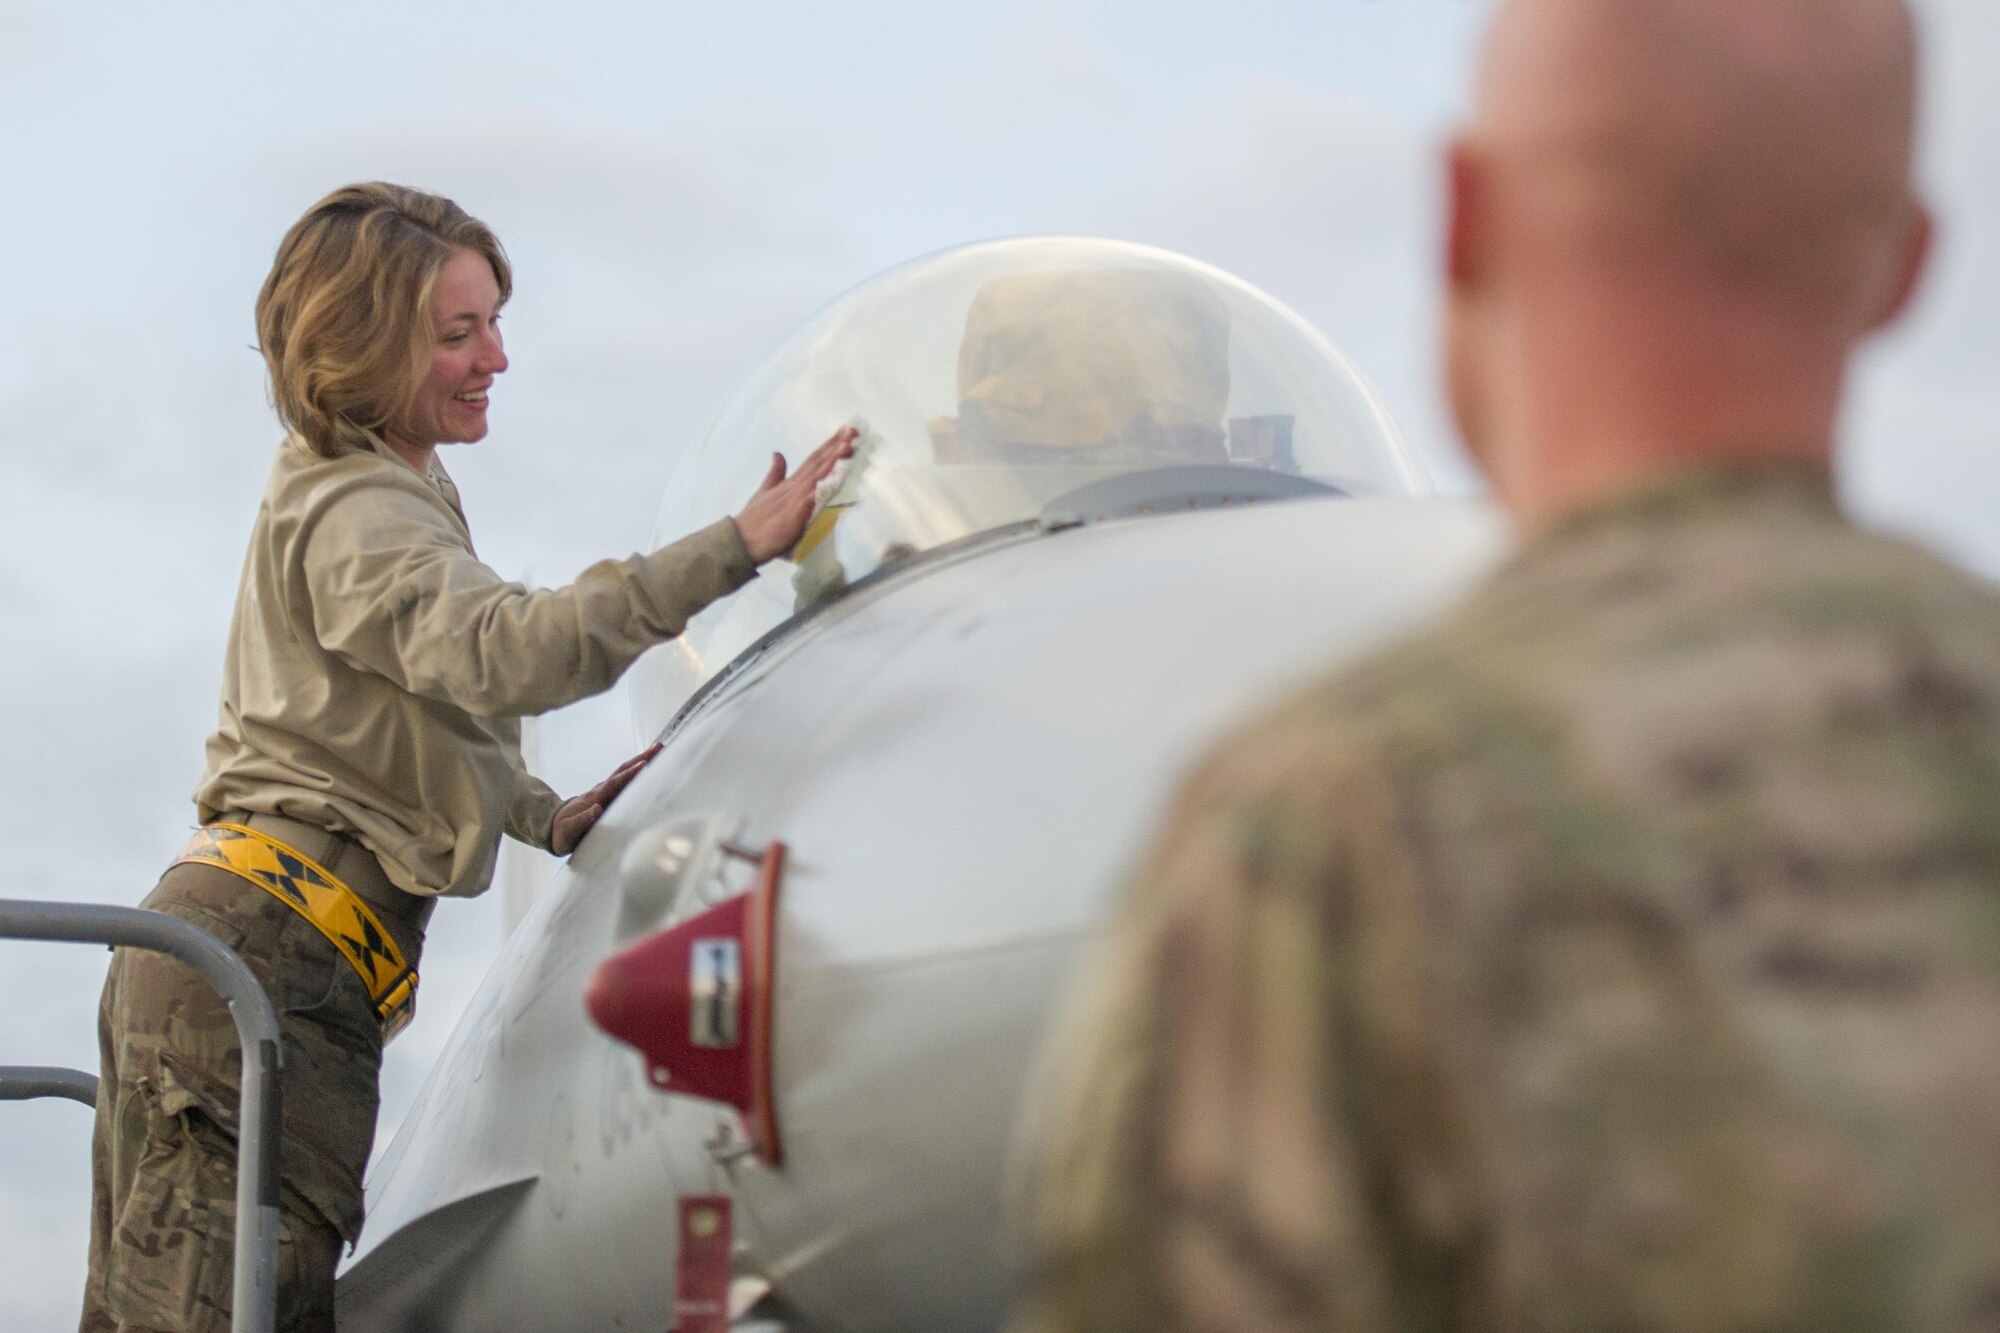 Staff Sgt. Eve Dorshorst, 455th Expeditionary Aircraft Maintenance Squadron crew chief, deployed from Hill Air Force Base, Utah, cleans the canopy of an F-16 Fighting Falcon at Bagram Airfield, Afghanistan, Jan. 06, 2016. The 455th EAMXS provides combat-ready aircraft to the air component commander in support of coalition forces throughout Afghanistan. (U.S. Air Force photo/Tech. Sgt. Robert Cloys)